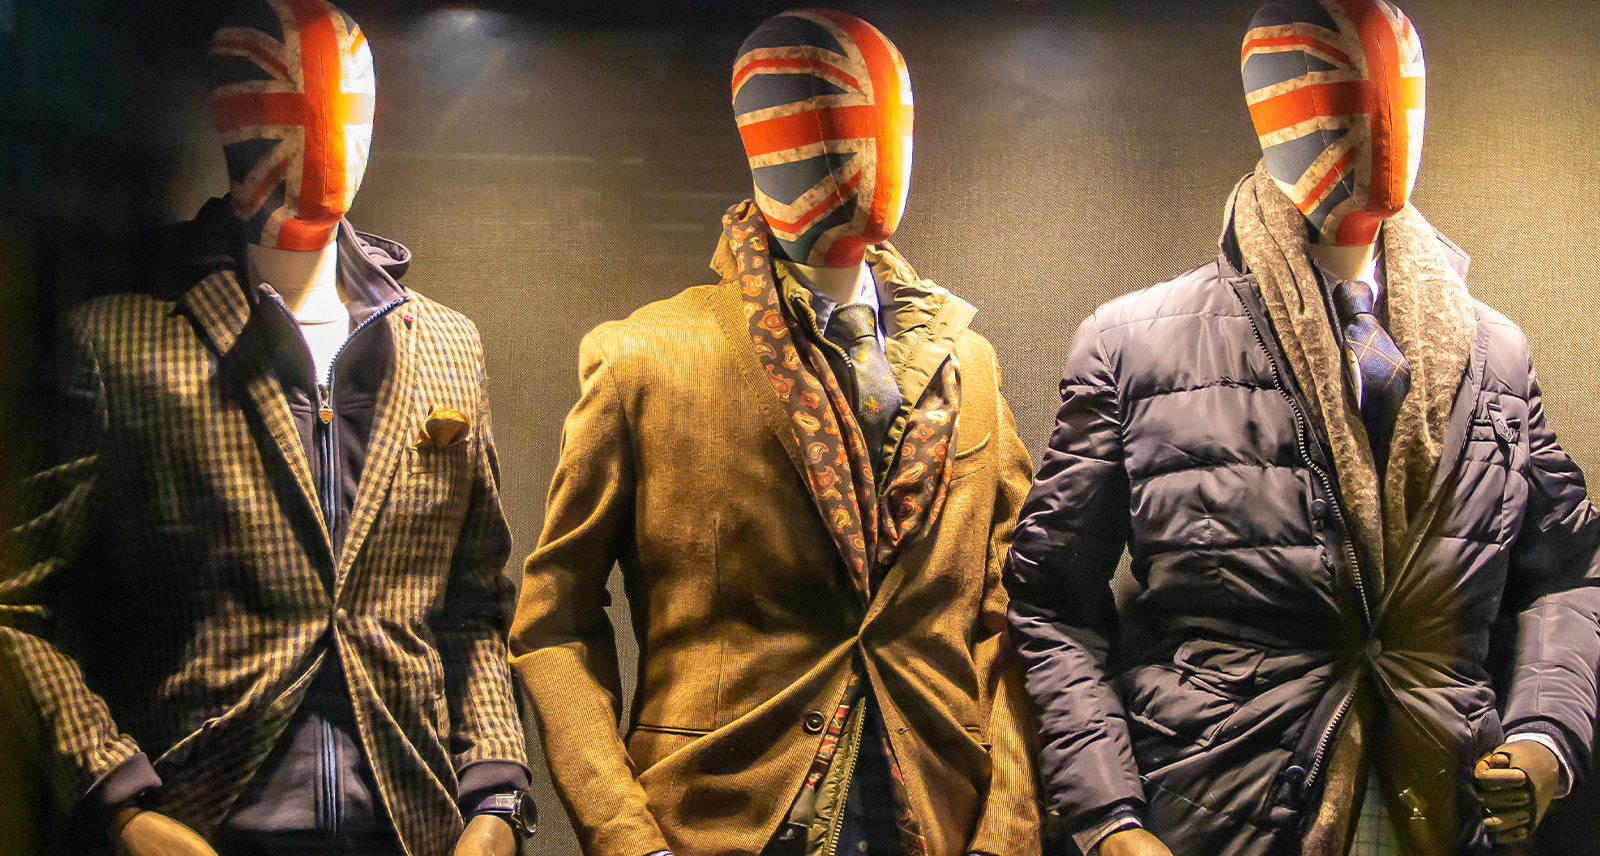 Three mannequins dressed in suits with the UK flag painted on their mannequin